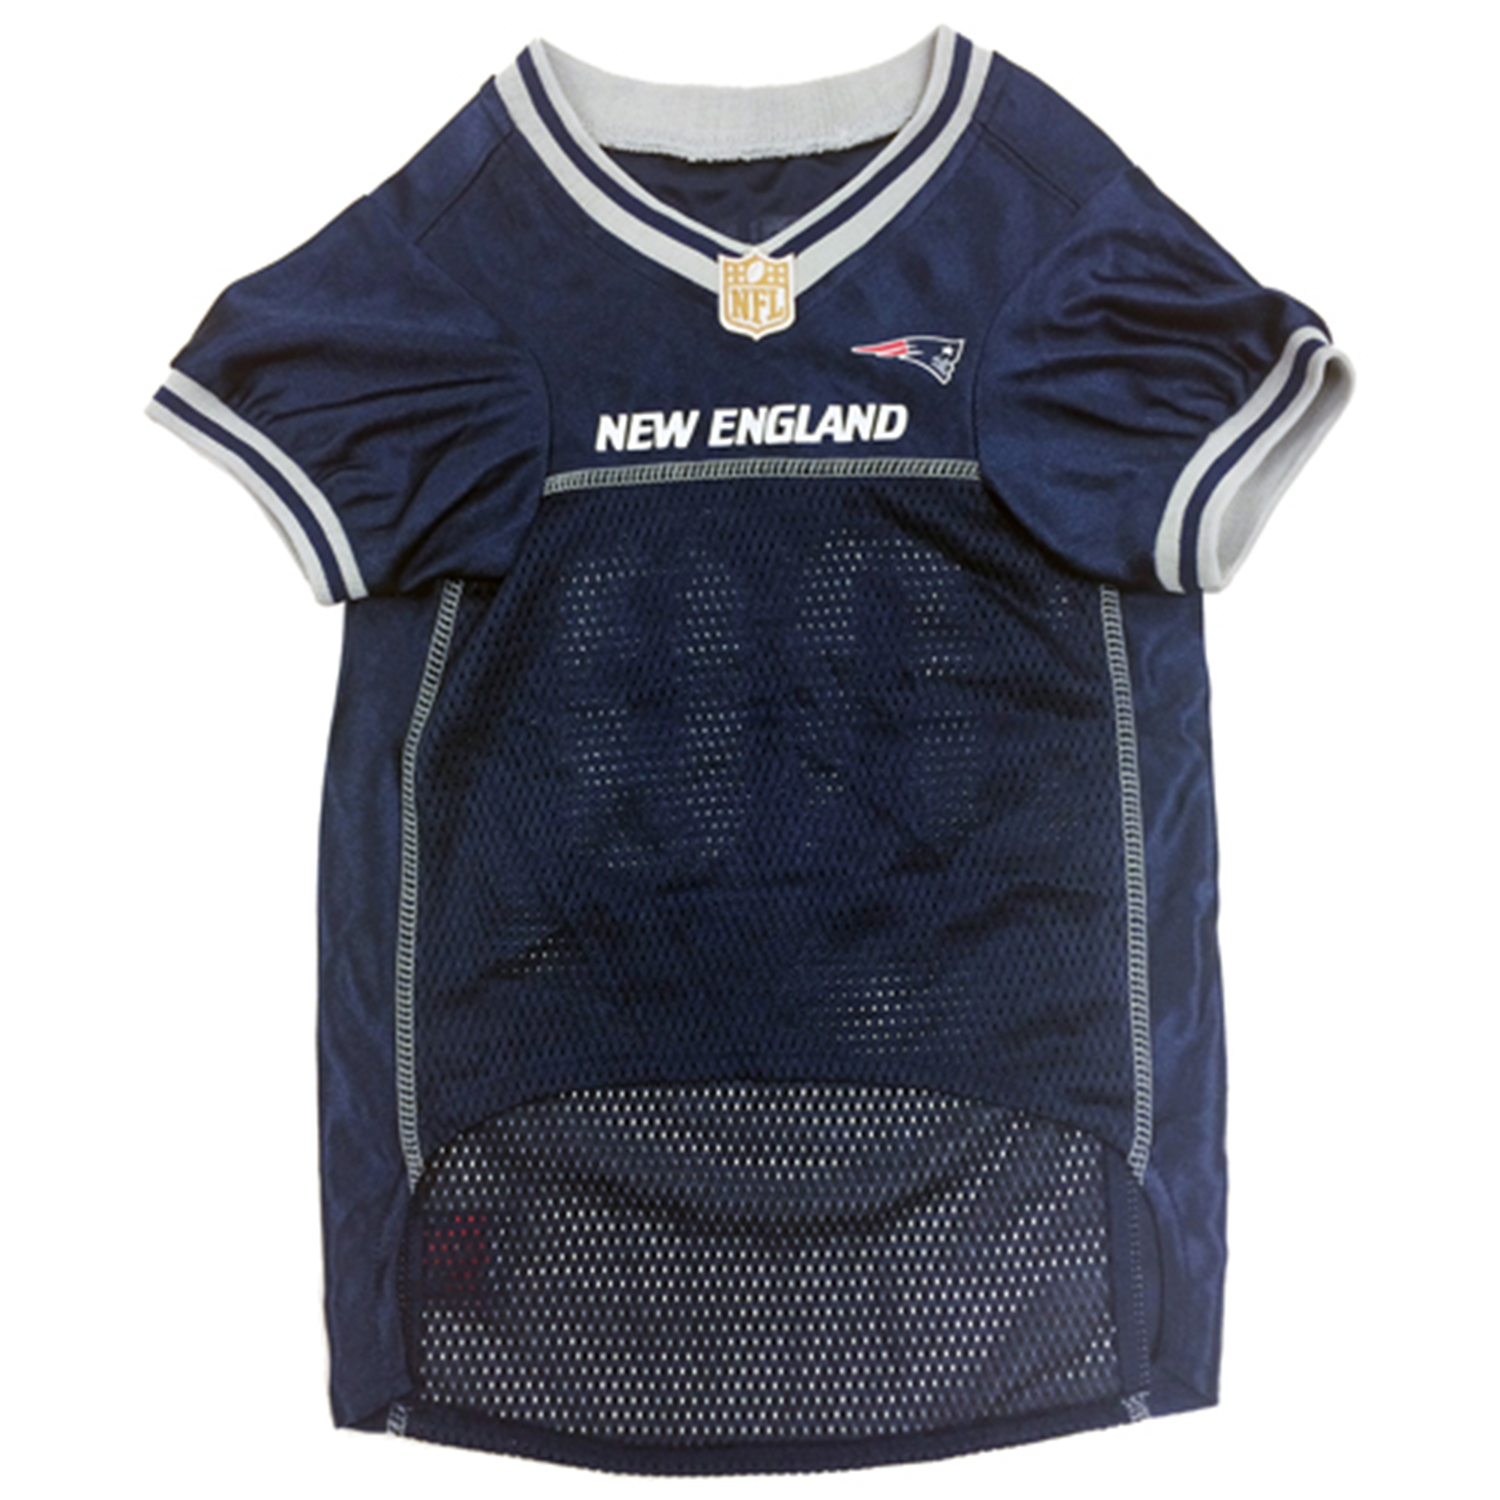 Pets First NFL New England PatriotsLicensed Mesh Jersey for Dogs and Cats - Small - image 2 of 6